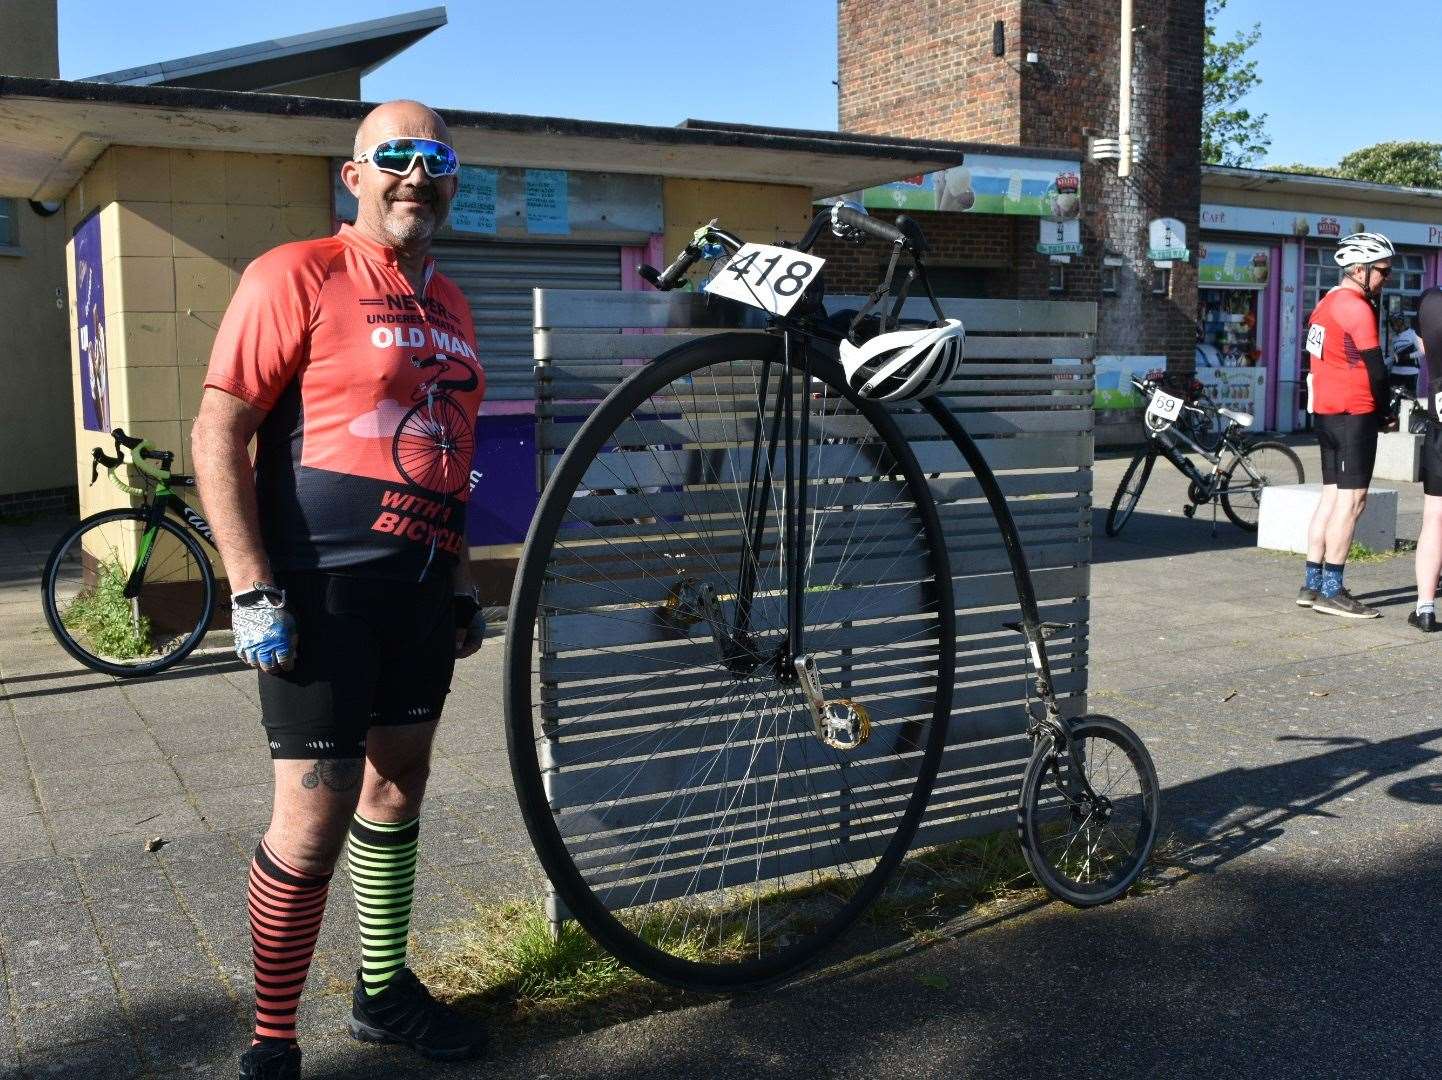 Hundreds turned out for a charity cycle event at the Riverside area in Gravesend. Photo: Jason Arthur